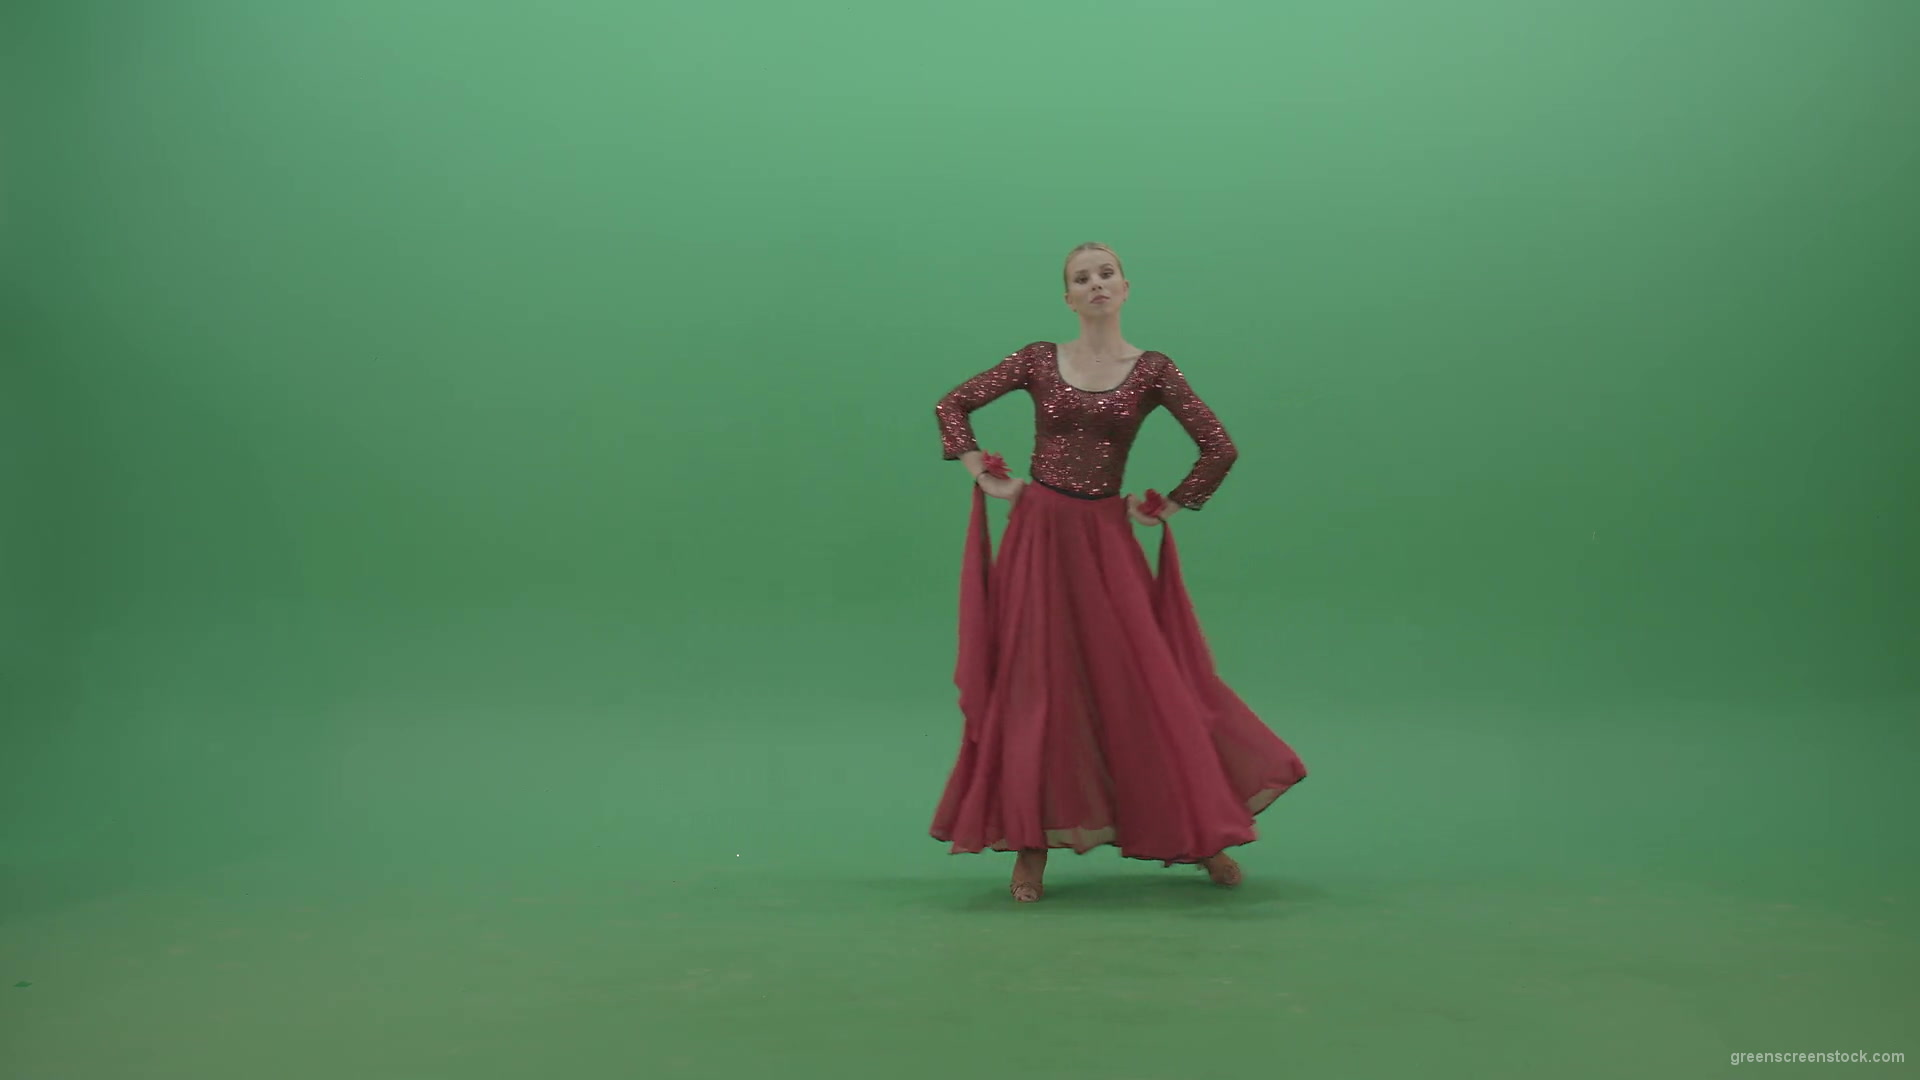 Blondie-in-red-latino-wear-moving-and-dance-on-green-screen-4K-Video-Footage-1920_009 Green Screen Stock